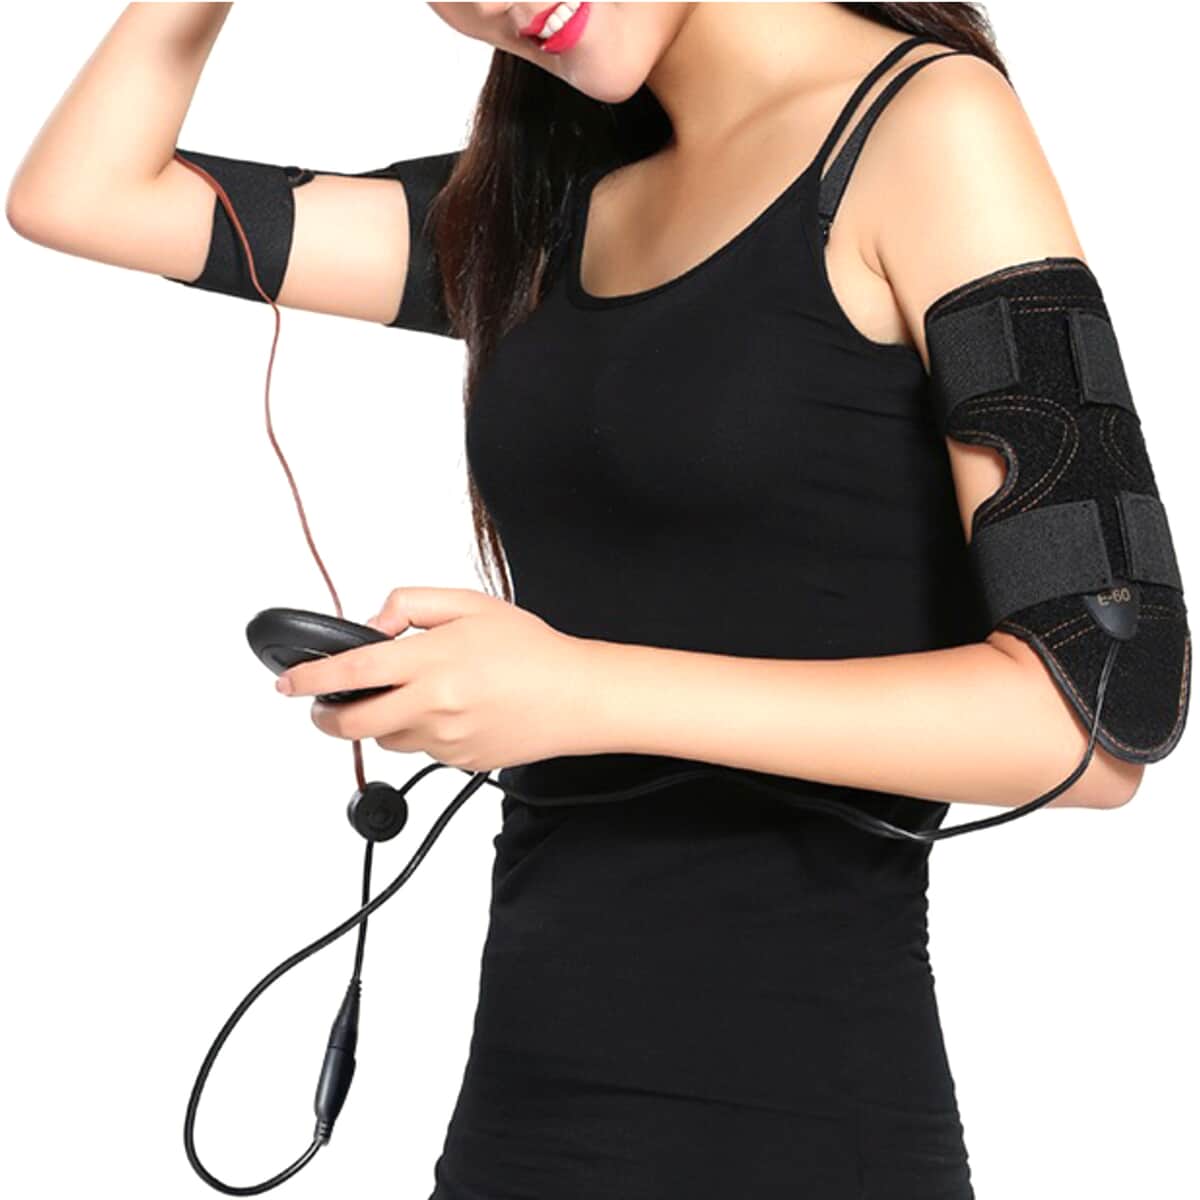 Evertone Bionic Arm Under Arm Toner, Rechargeable Remote Controlled Arm Toner With 10 Training Modes image number 0